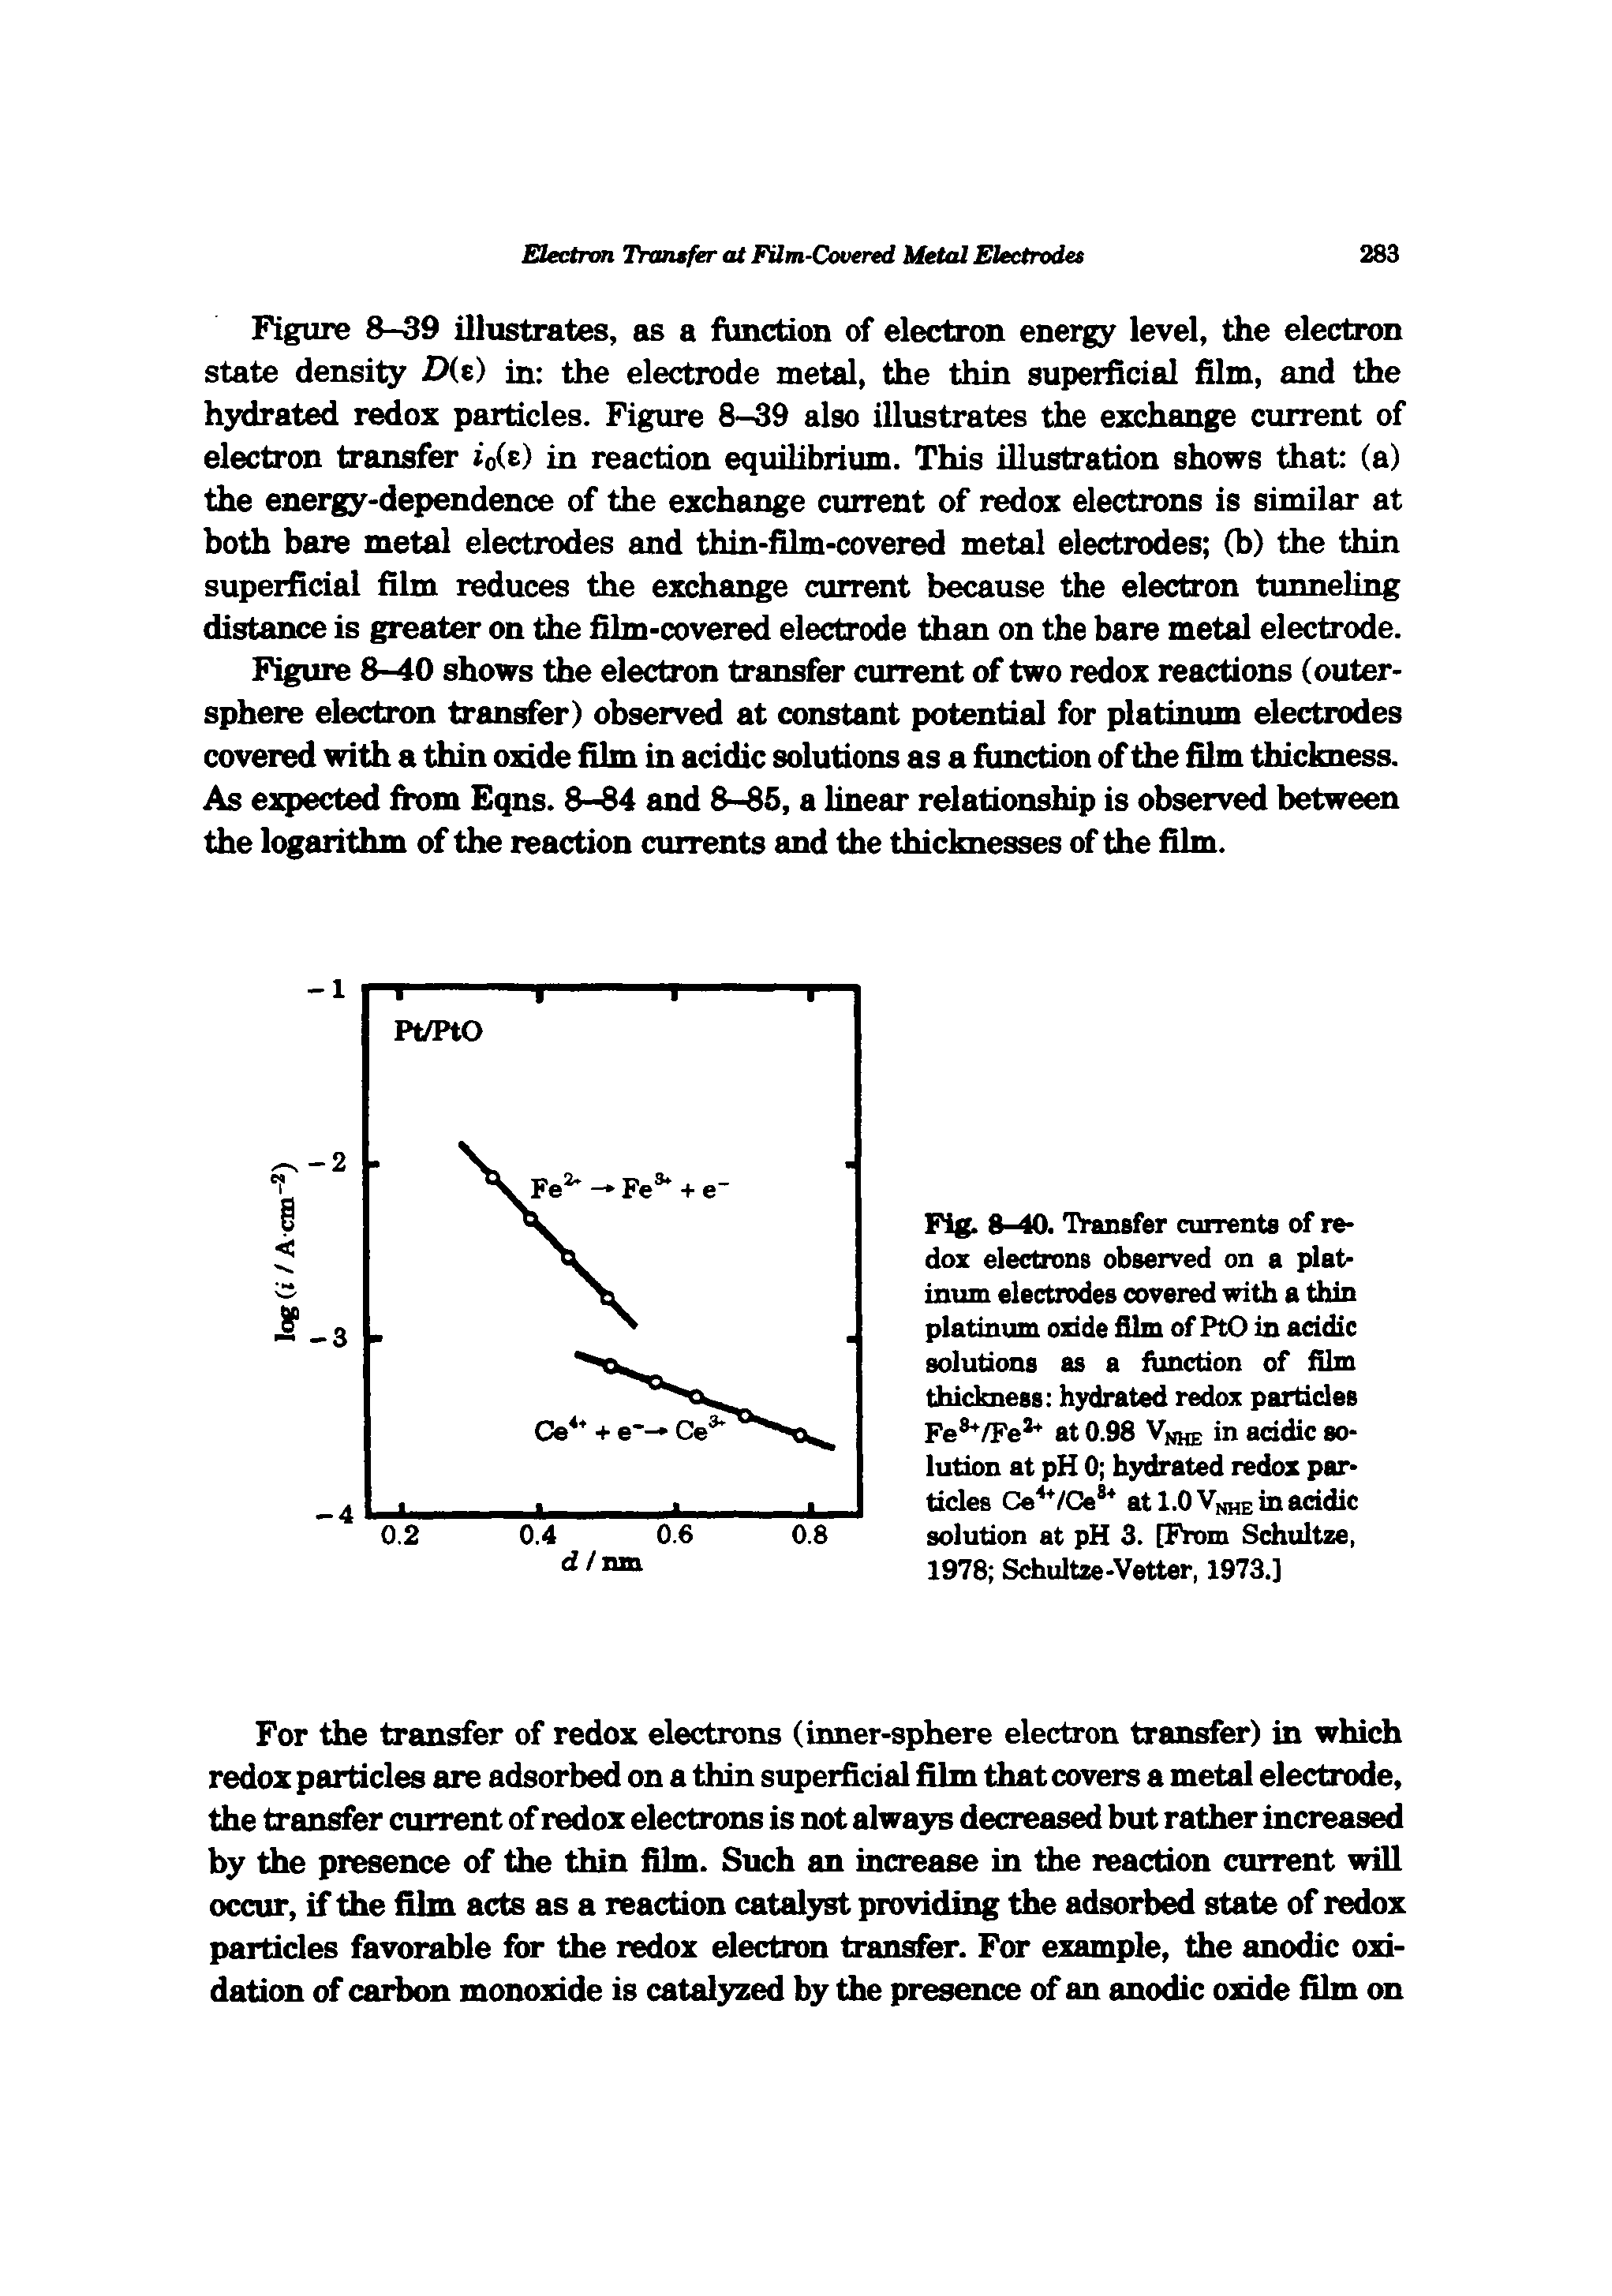 Fig. 8-40. Transfer currents of redox electrons observed on a platinum electrodes covered with a thin platinum oxide film of PtO in acidic solutions as a function of film thickness hydrated redox particles Fe /Fe at 0.98 V he in acidic solution at pH 0 hydrated redox particles Ce /Ce at 1.0 in acidic solution at pH 3. [From Schultze, 1978 Schultze-Vetter, 1973.]...